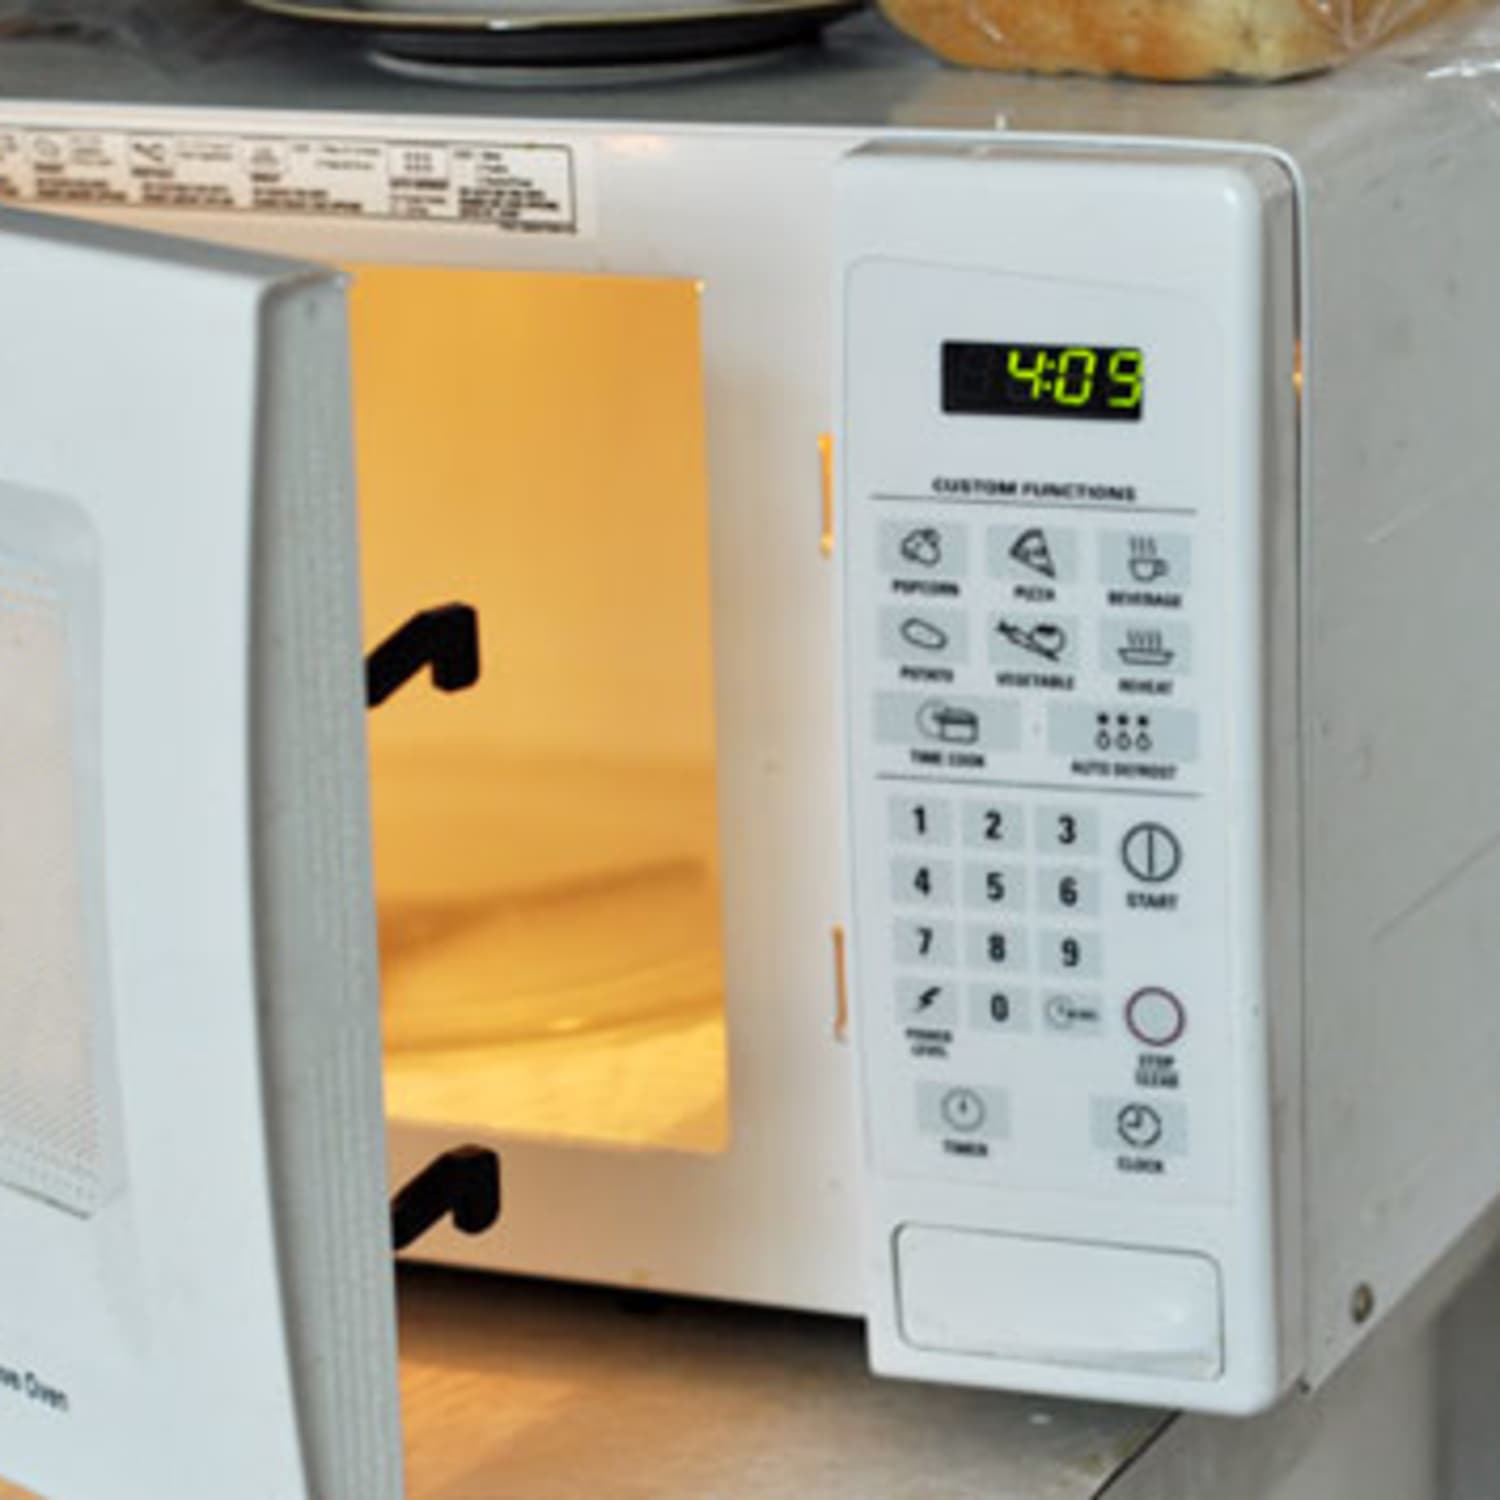 What Causes A Sealed Bag Of Vegetables To Expand When It Is Heated In An  Apex Microwave Oven